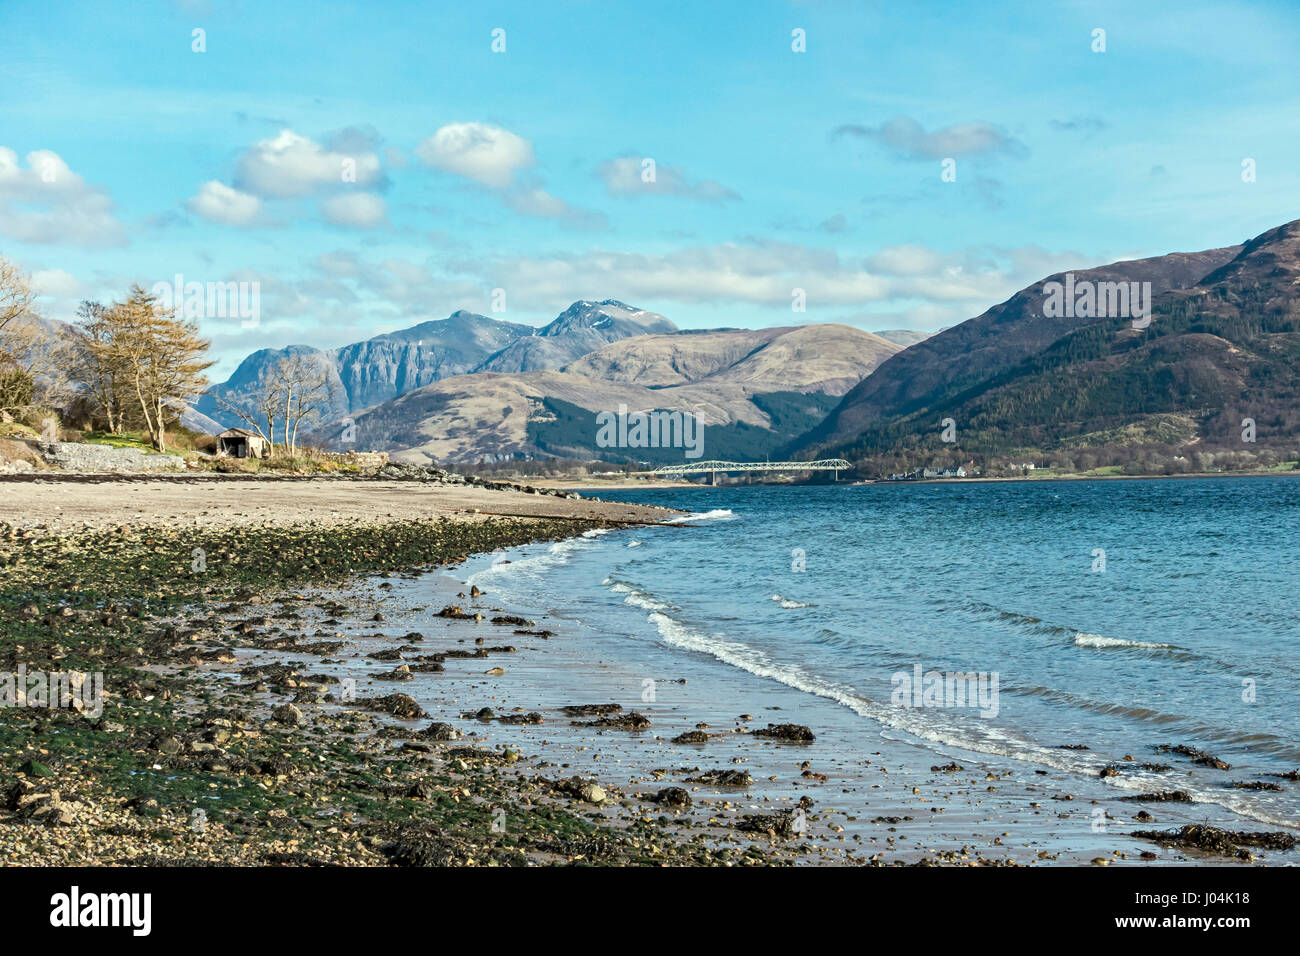 View from Scottish village Onich across Loch Linnhe towards the Glen Coe mountains with Bidean nam Bian in Highland Scotland UK Stock Photo